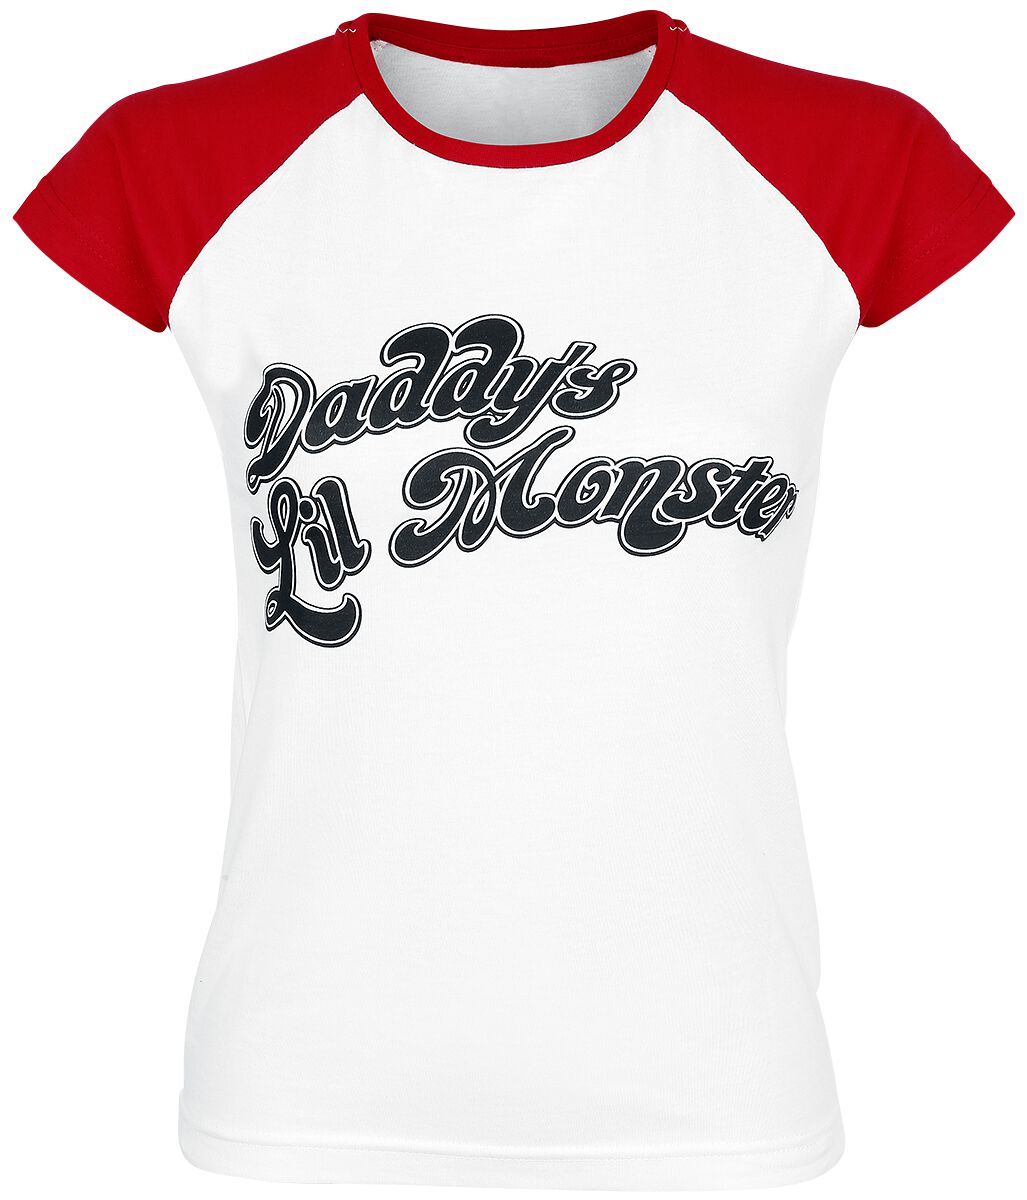 Suicide Squad Daddy's Lil' Monster T-Shirt weiß rot in S